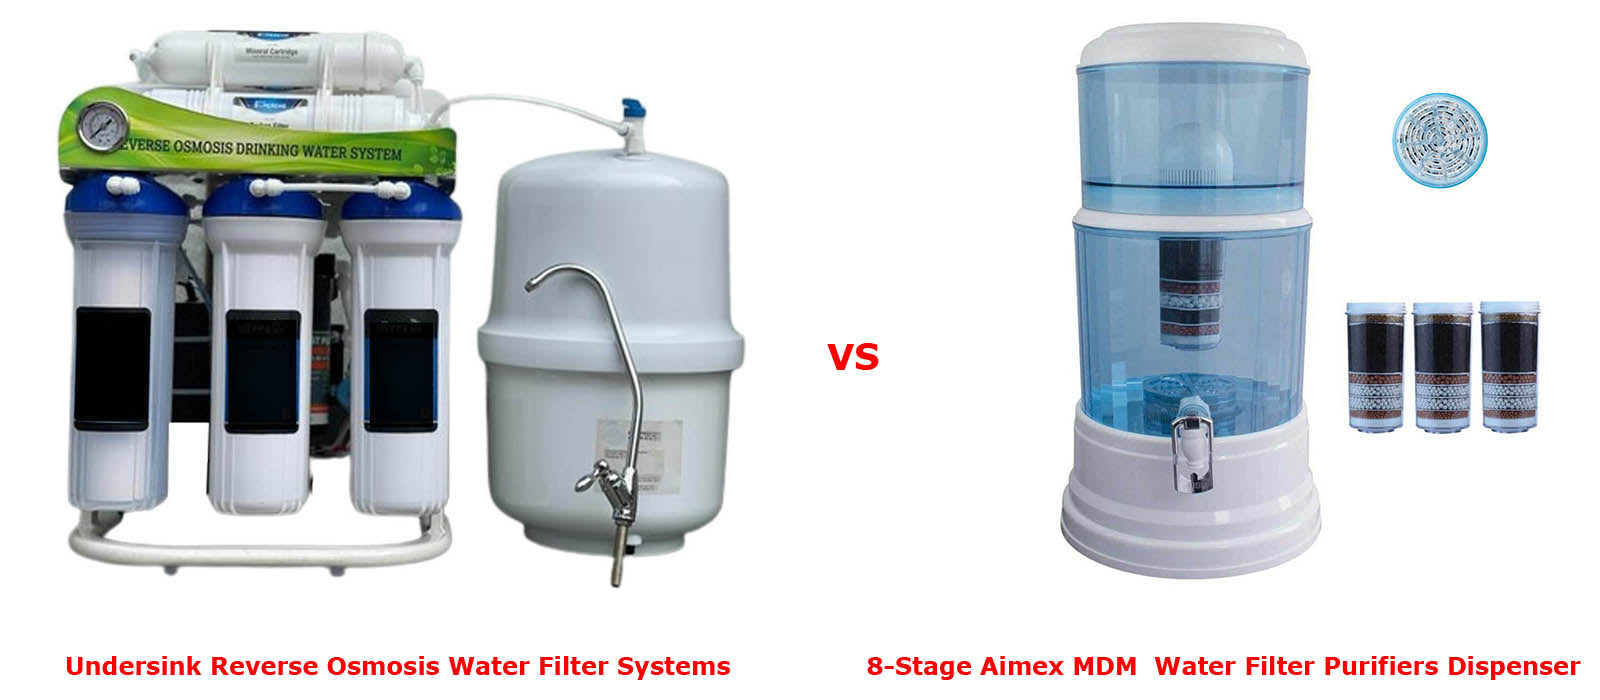 Undersink Reverse Osmosis Water Filter Systems vs. 8-Stage Aimex MDM  Water Filter Purifiers Dispenser